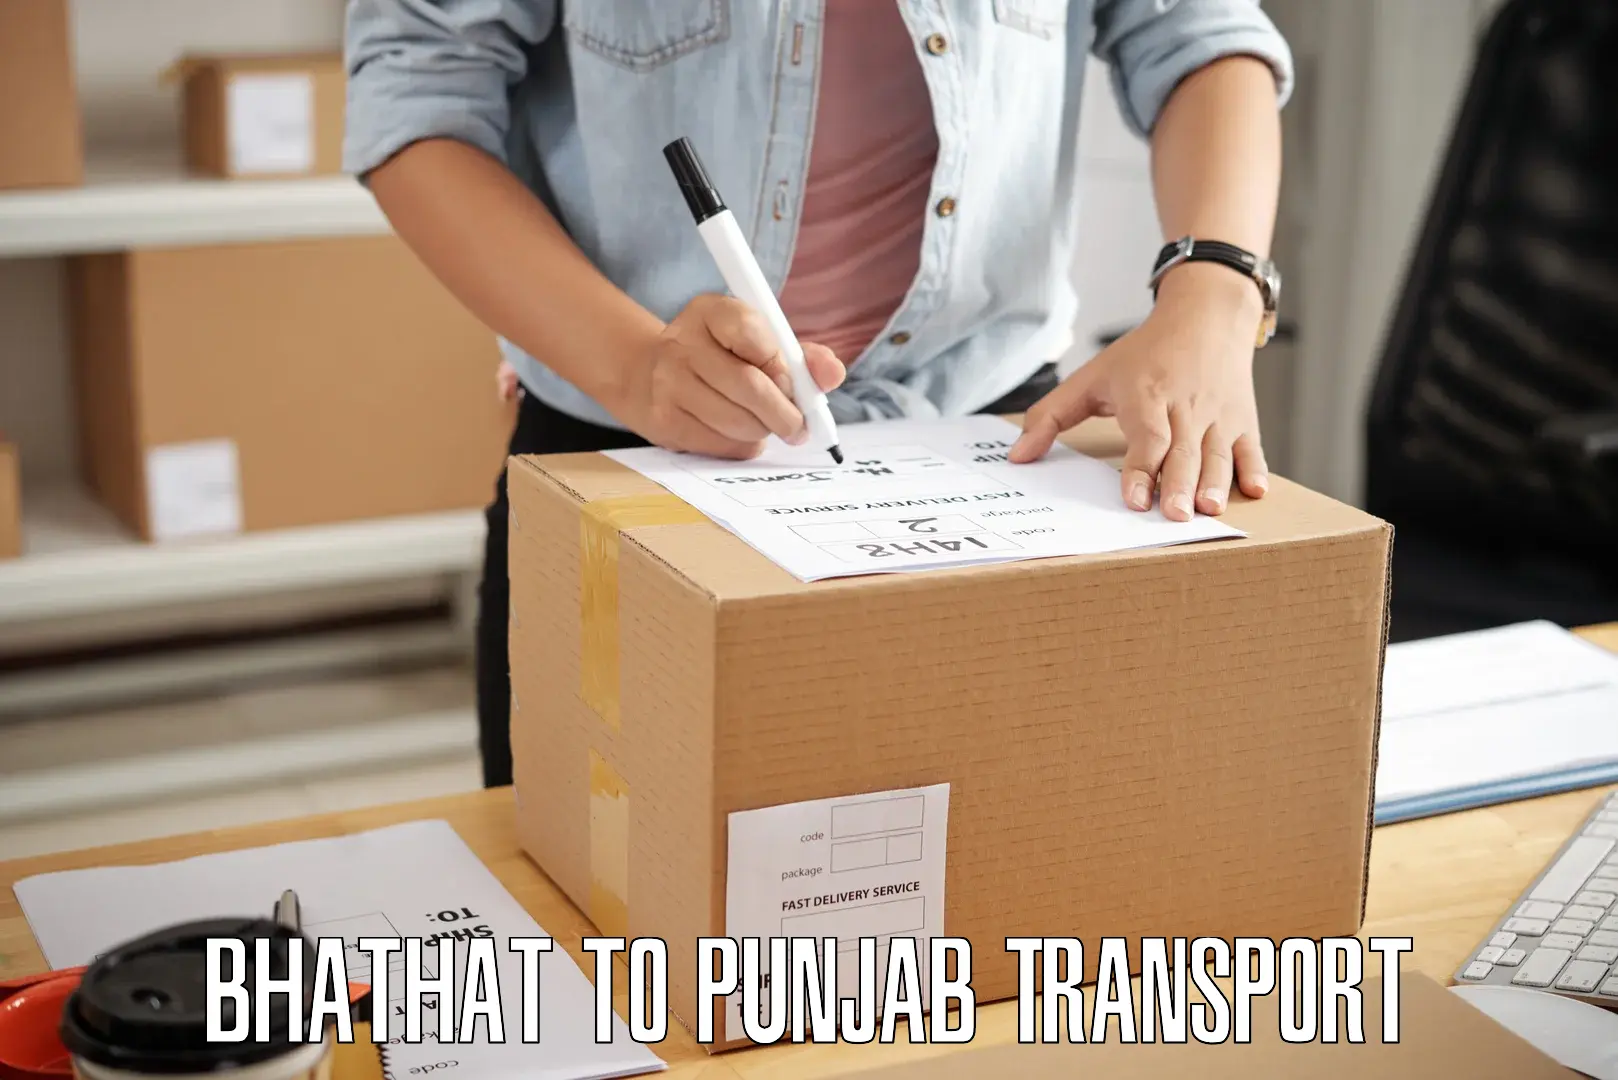 Road transport services Bhathat to Bathinda